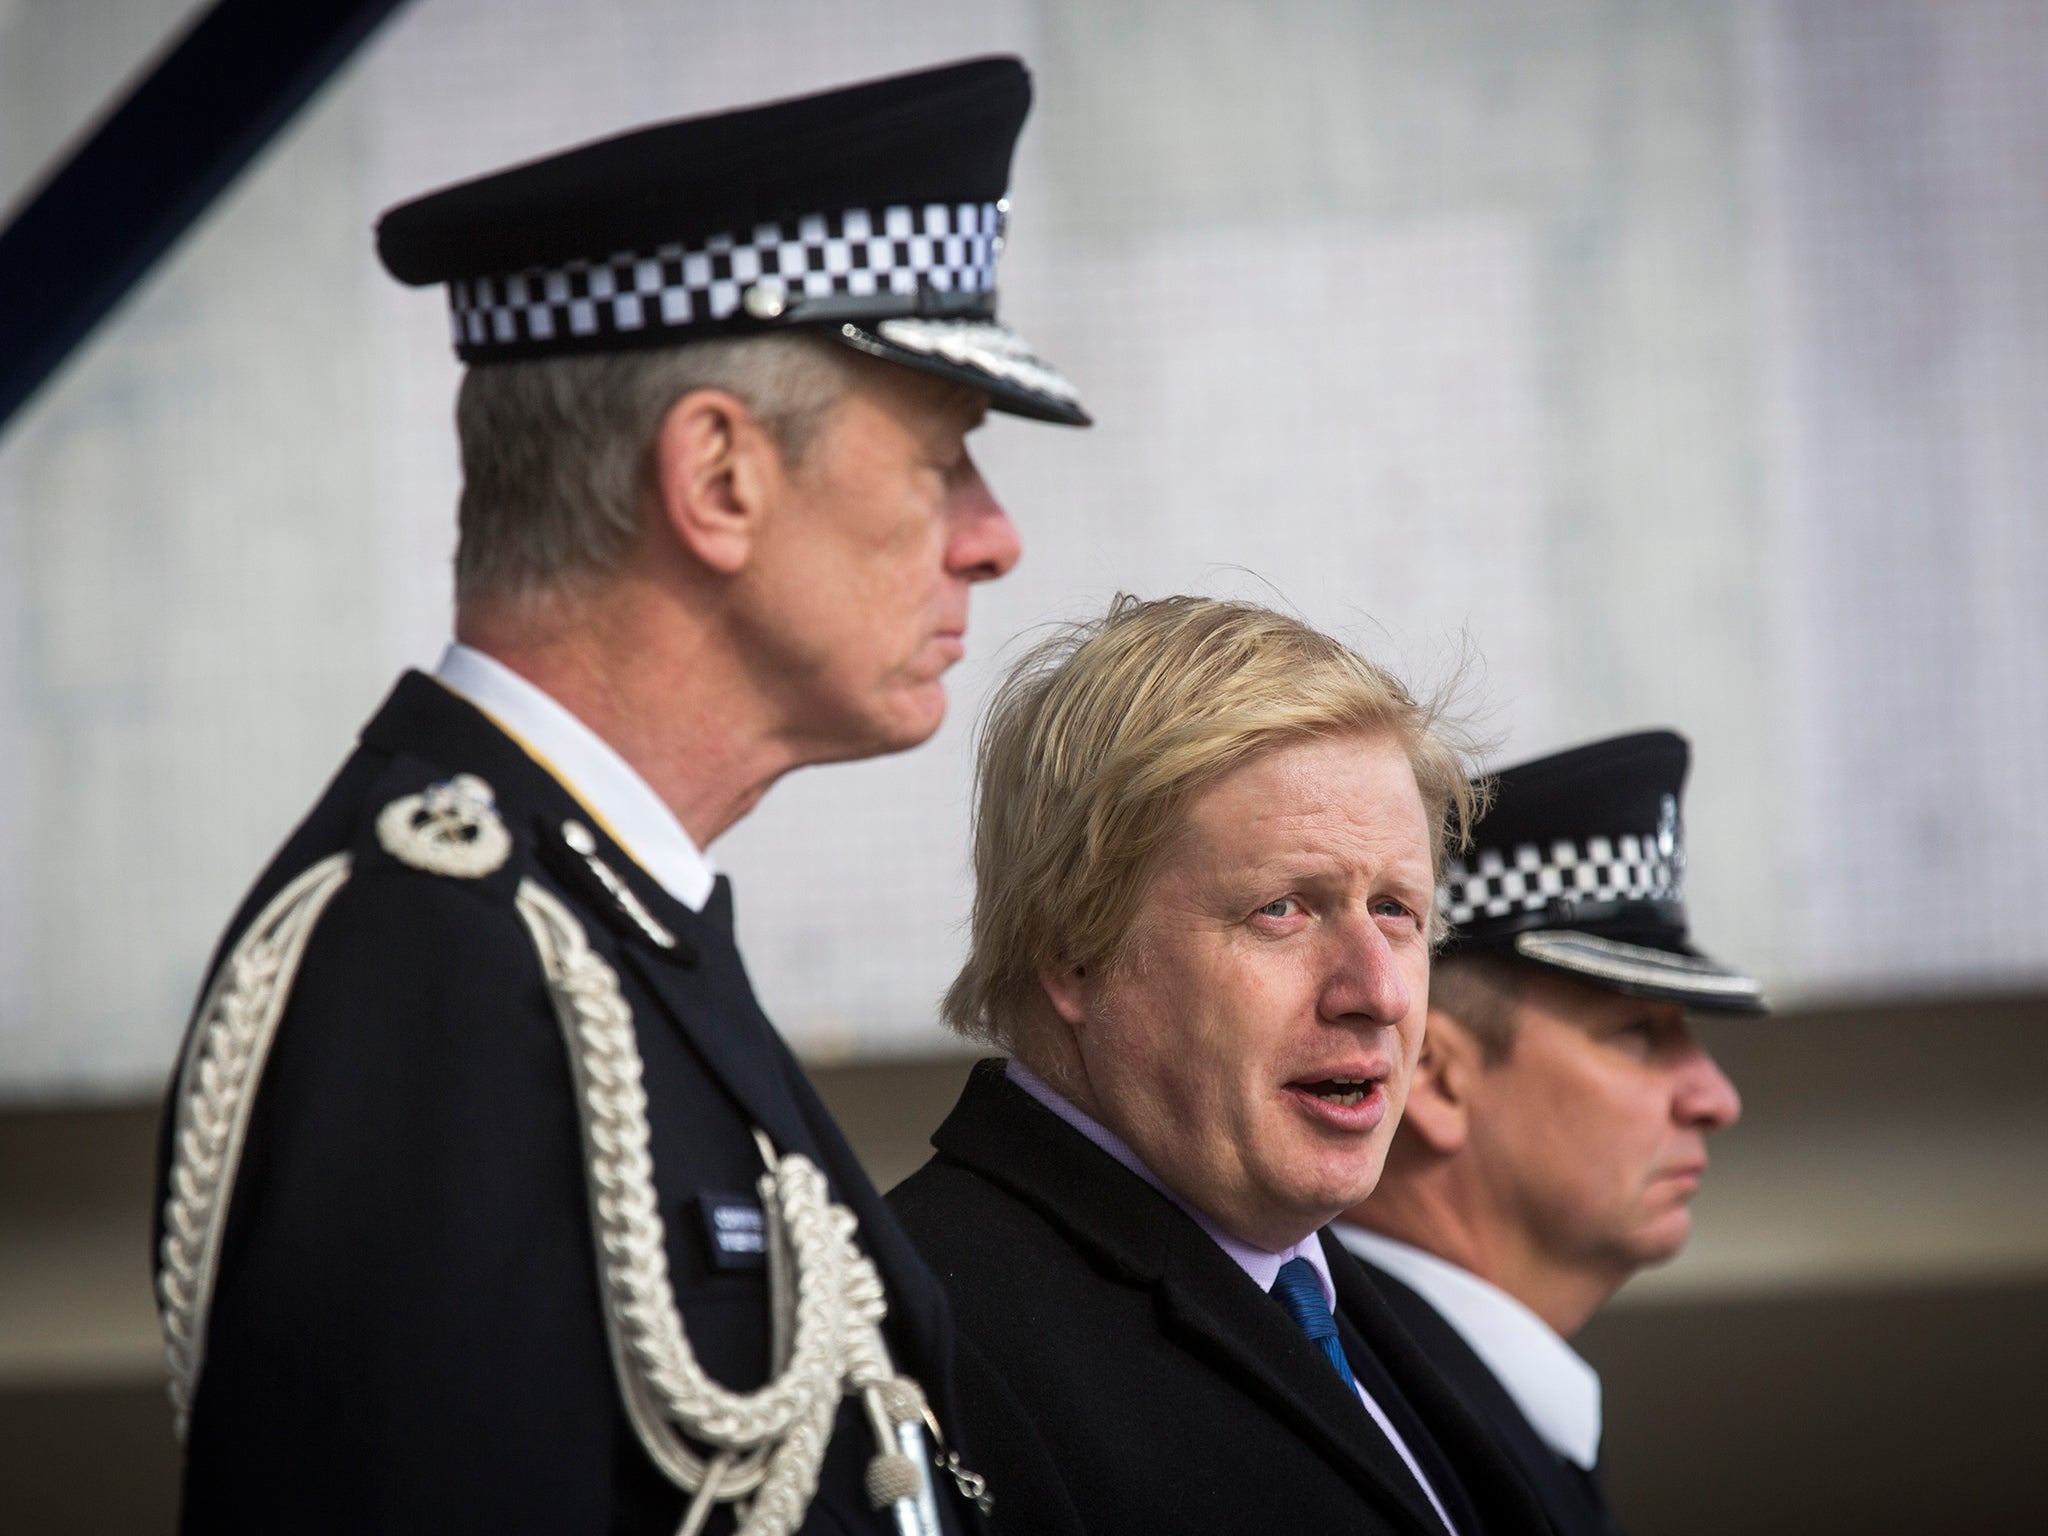 "Sir Bernard Hogan-Howe, left, is one of the greatest failures in recent British policing"